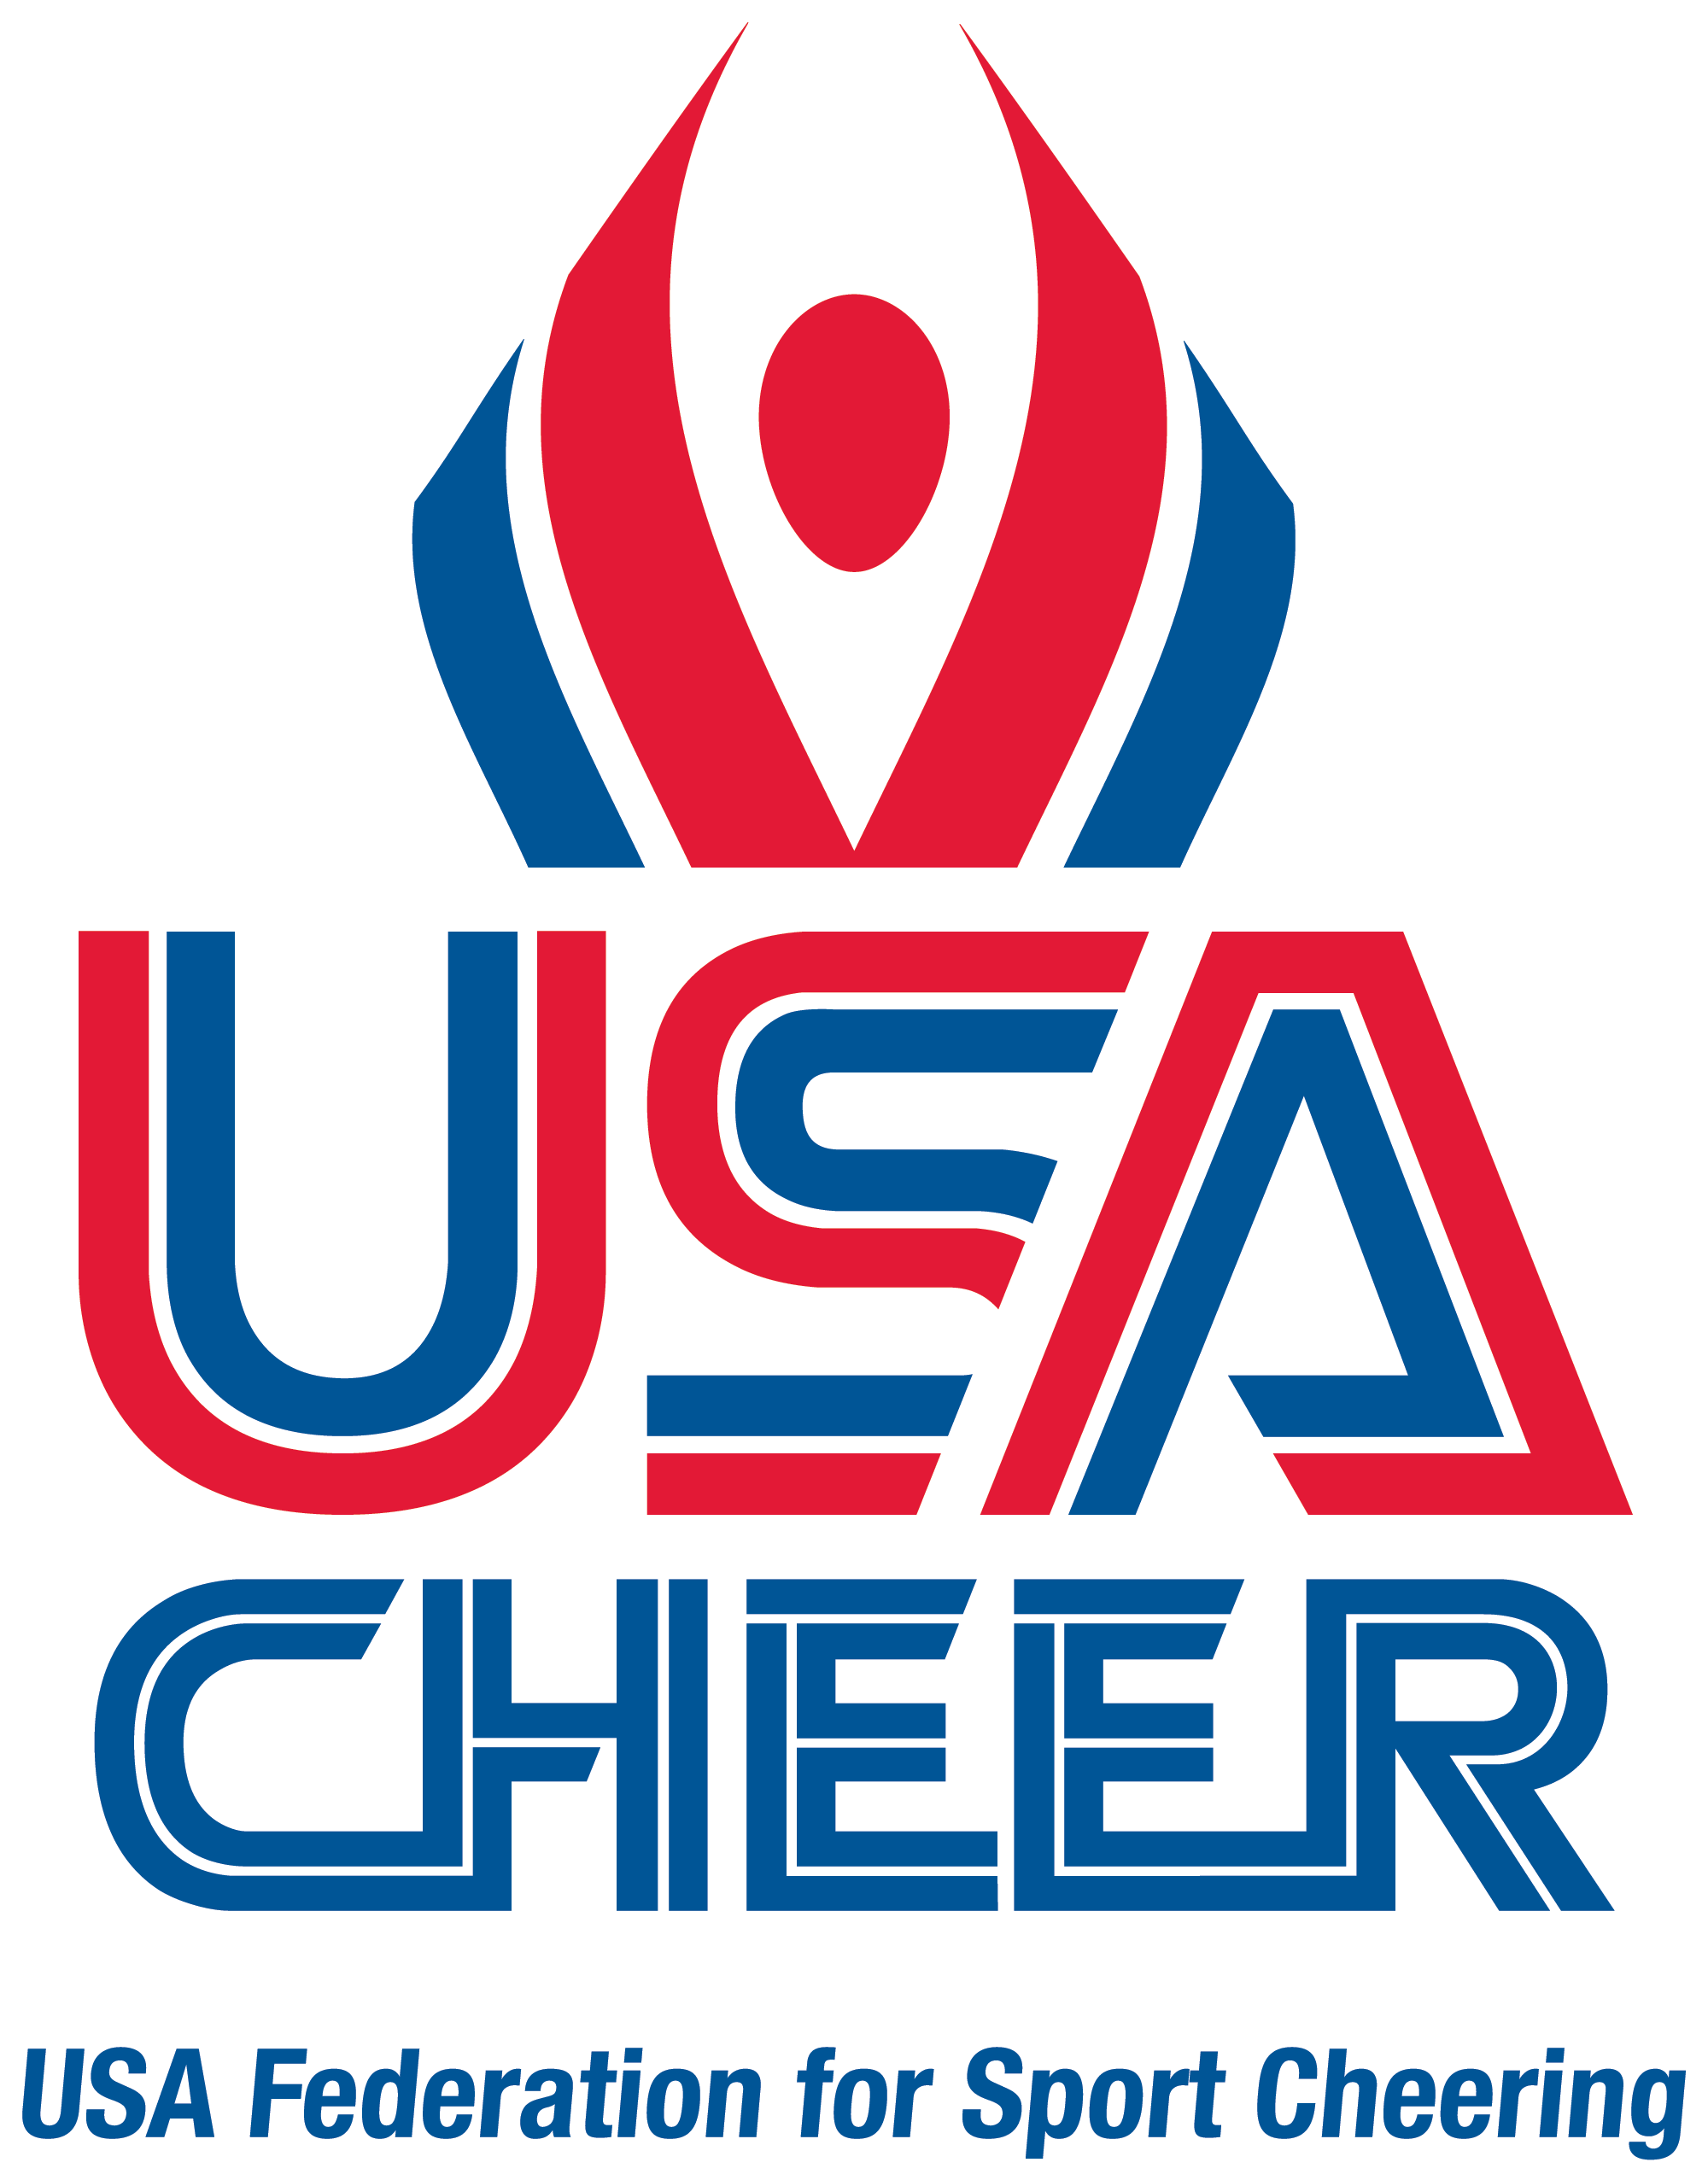 USA Federation for sport cheering logo